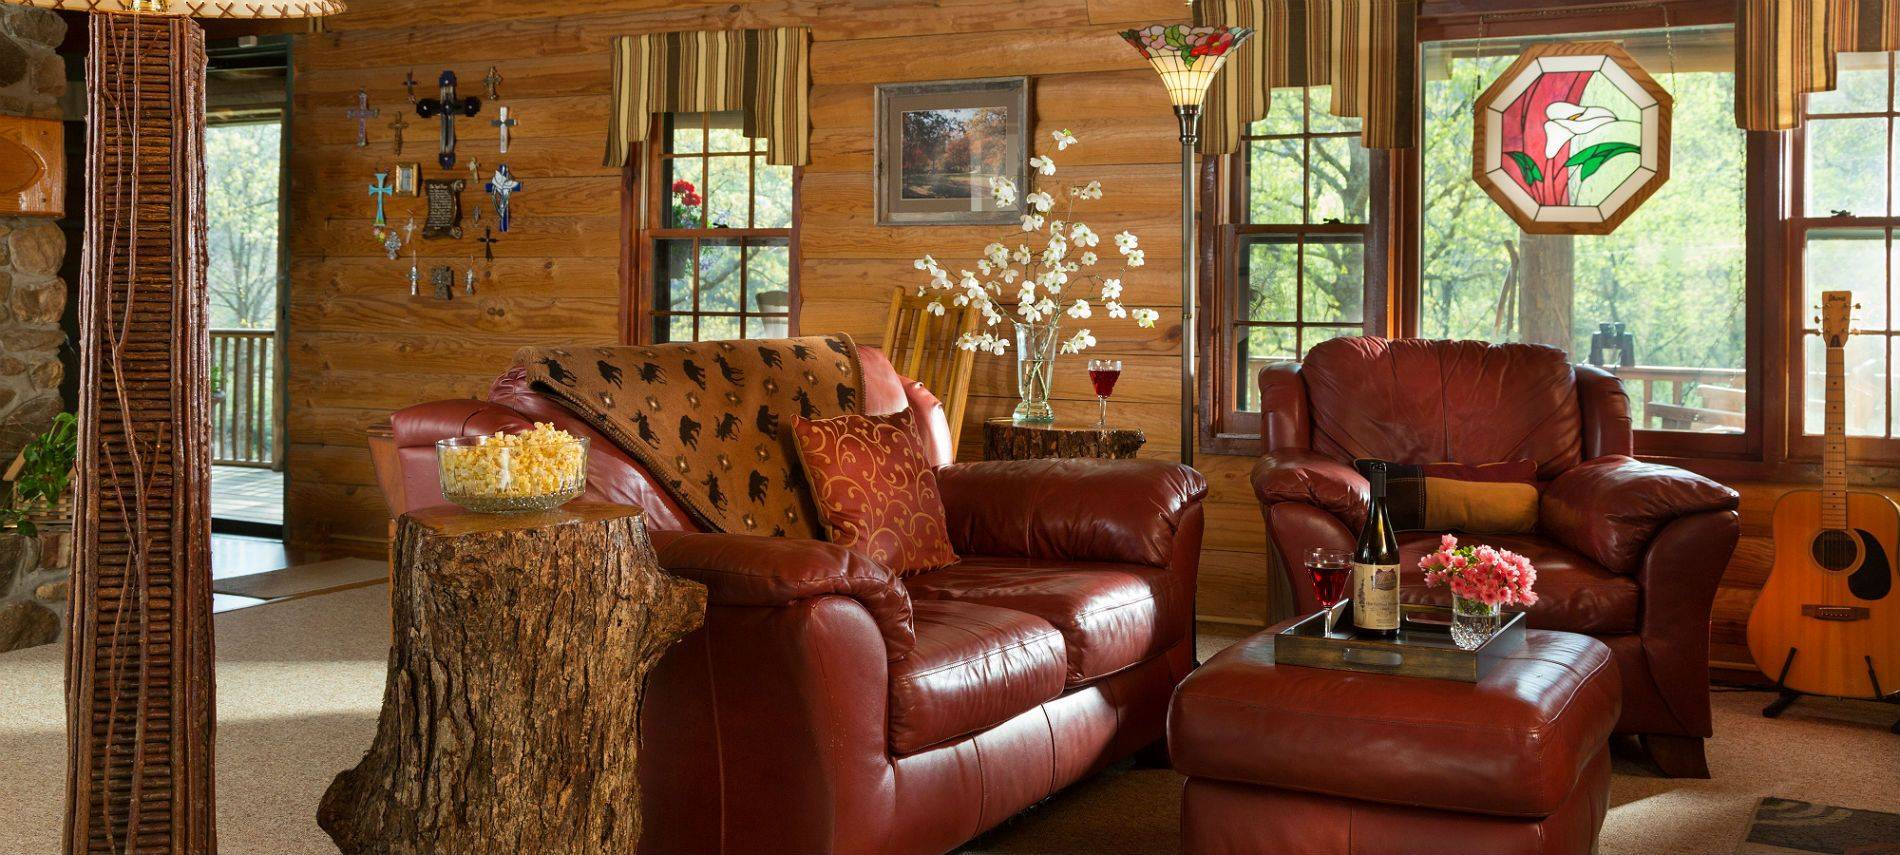 Leather sofa a side chair in a living room with log walls, rustic decor, stained glass floor lamp and window accent.